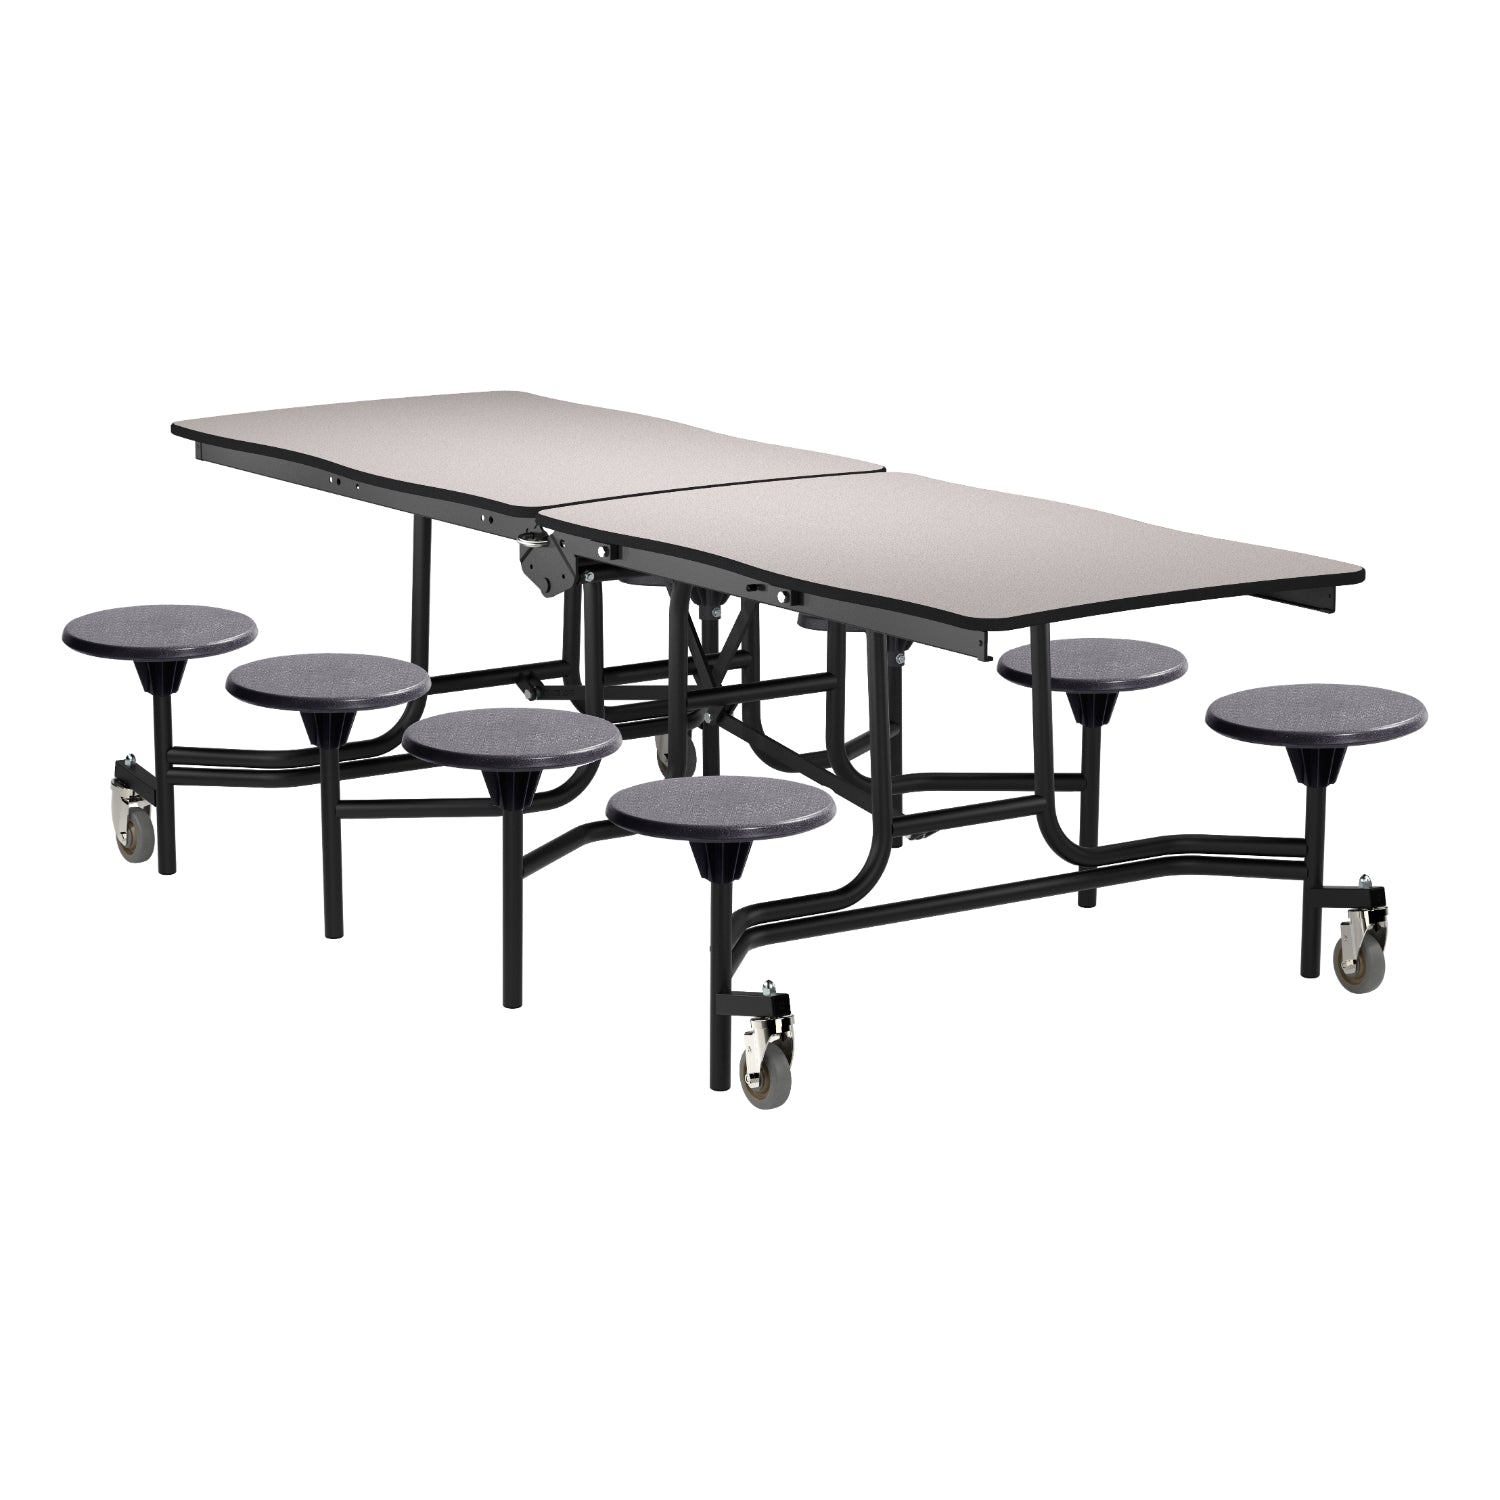 Mobile Cafeteria Table with 8 Stools, 8' Swerve, Particleboard Core, Vinyl T-Mold Edge, Textured Black Frame